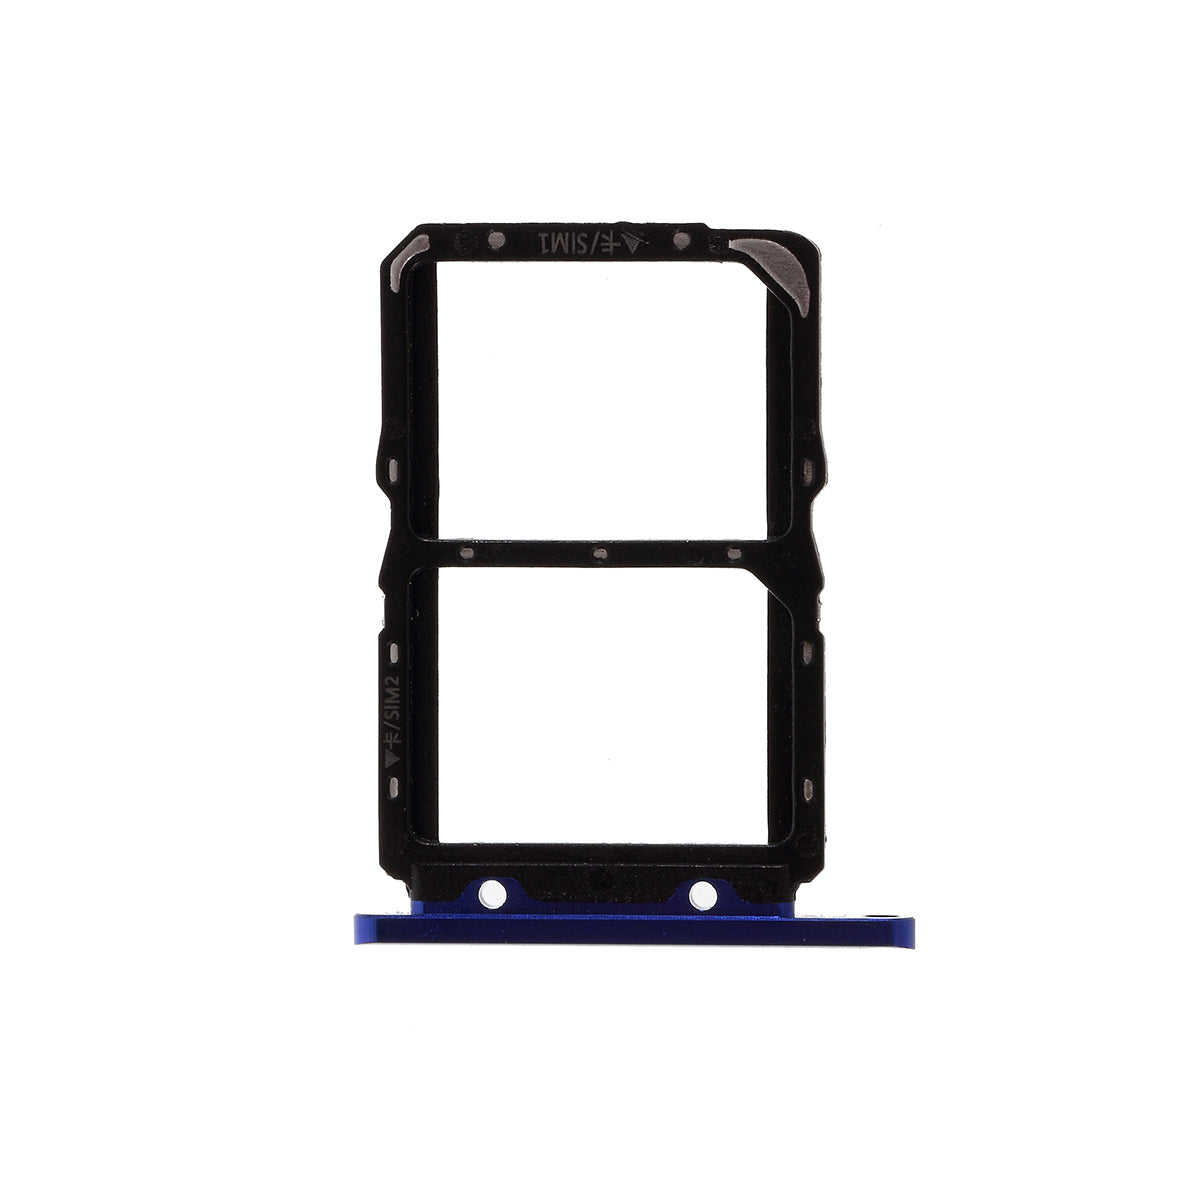 For Huawei Honor 20 / Nova 5T YAL-L21 OEM Dual SIM Card Tray Holder Replace Part (without Logo) - Navy Blue